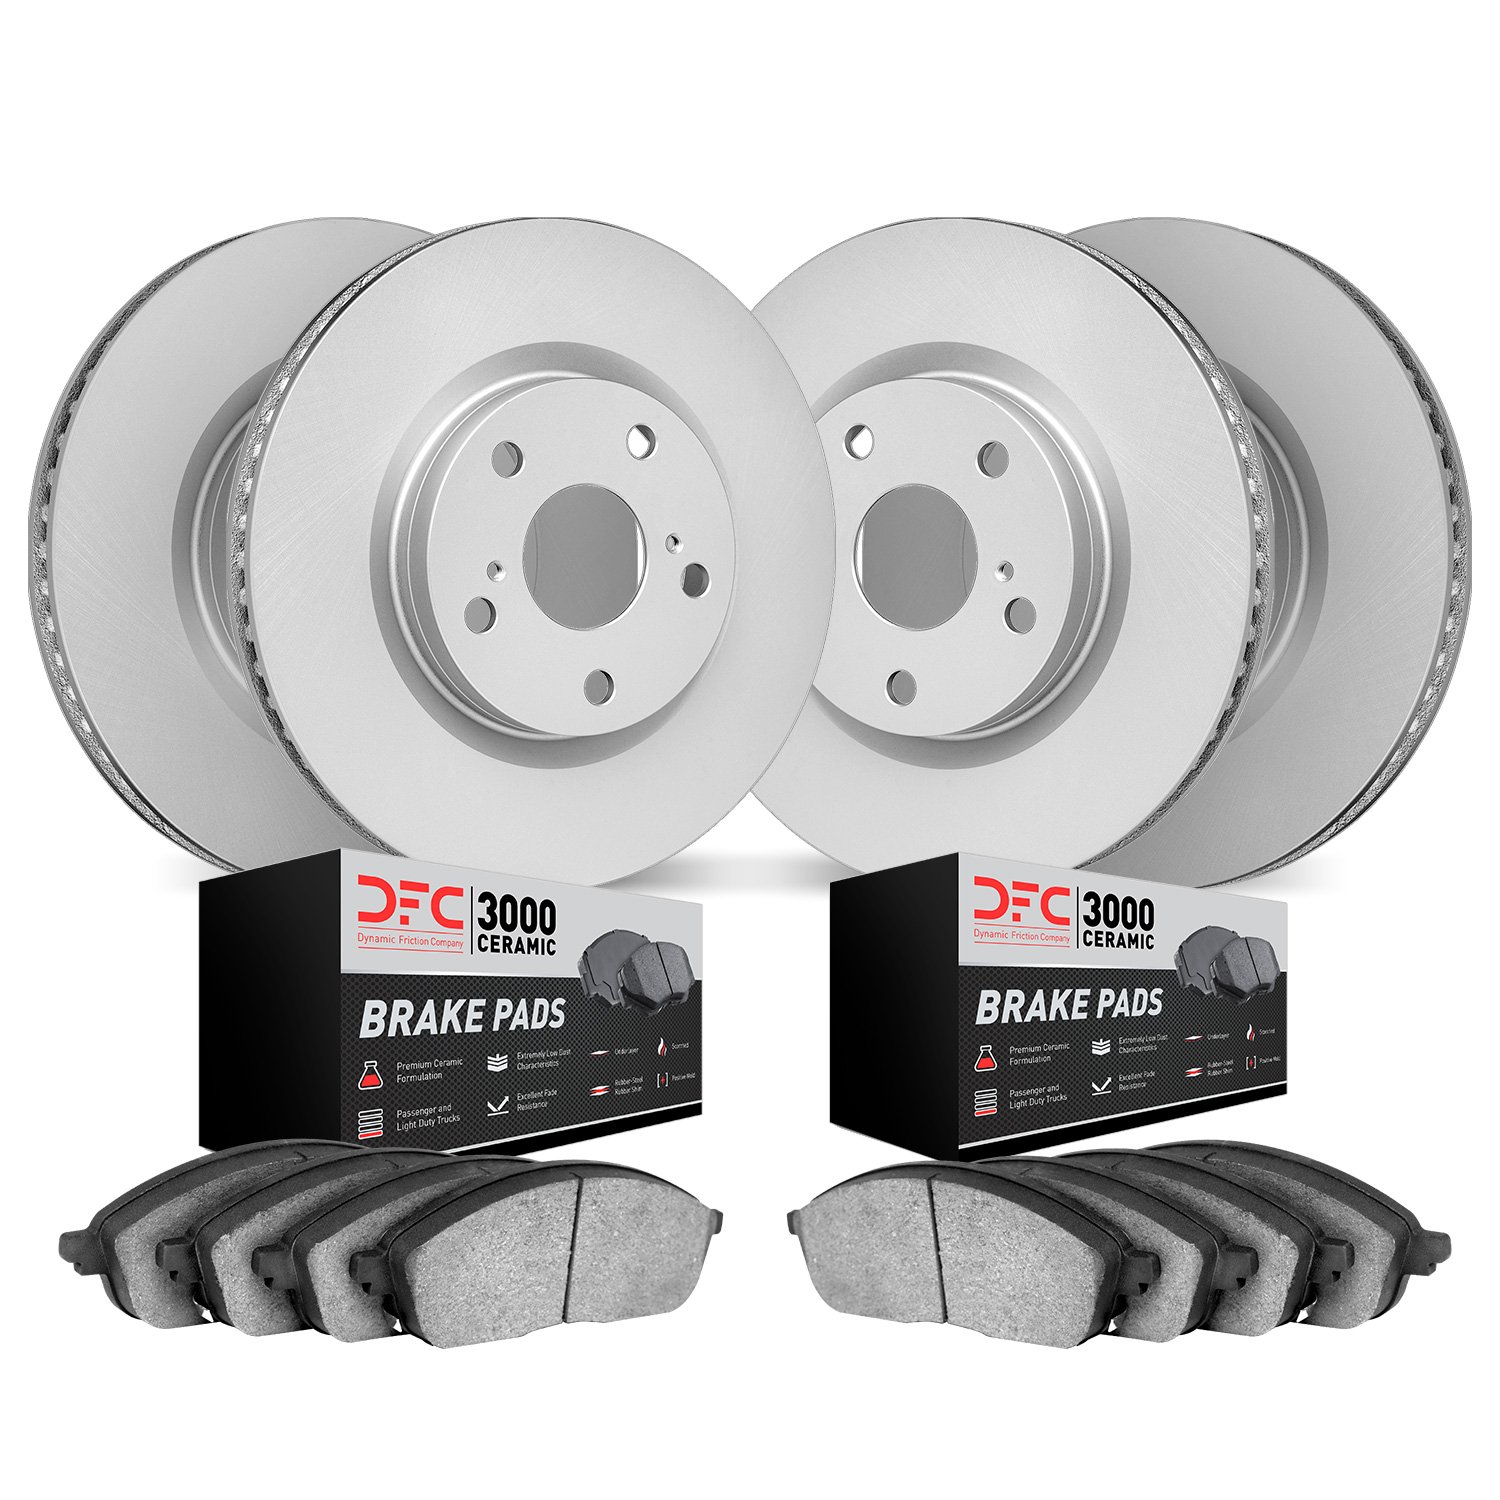 4304-56004 Geospec Brake Rotors with 3000-Series Ceramic Brake Pads Kit, 2003-2011 Ford/Lincoln/Mercury/Mazda, Position: Front a